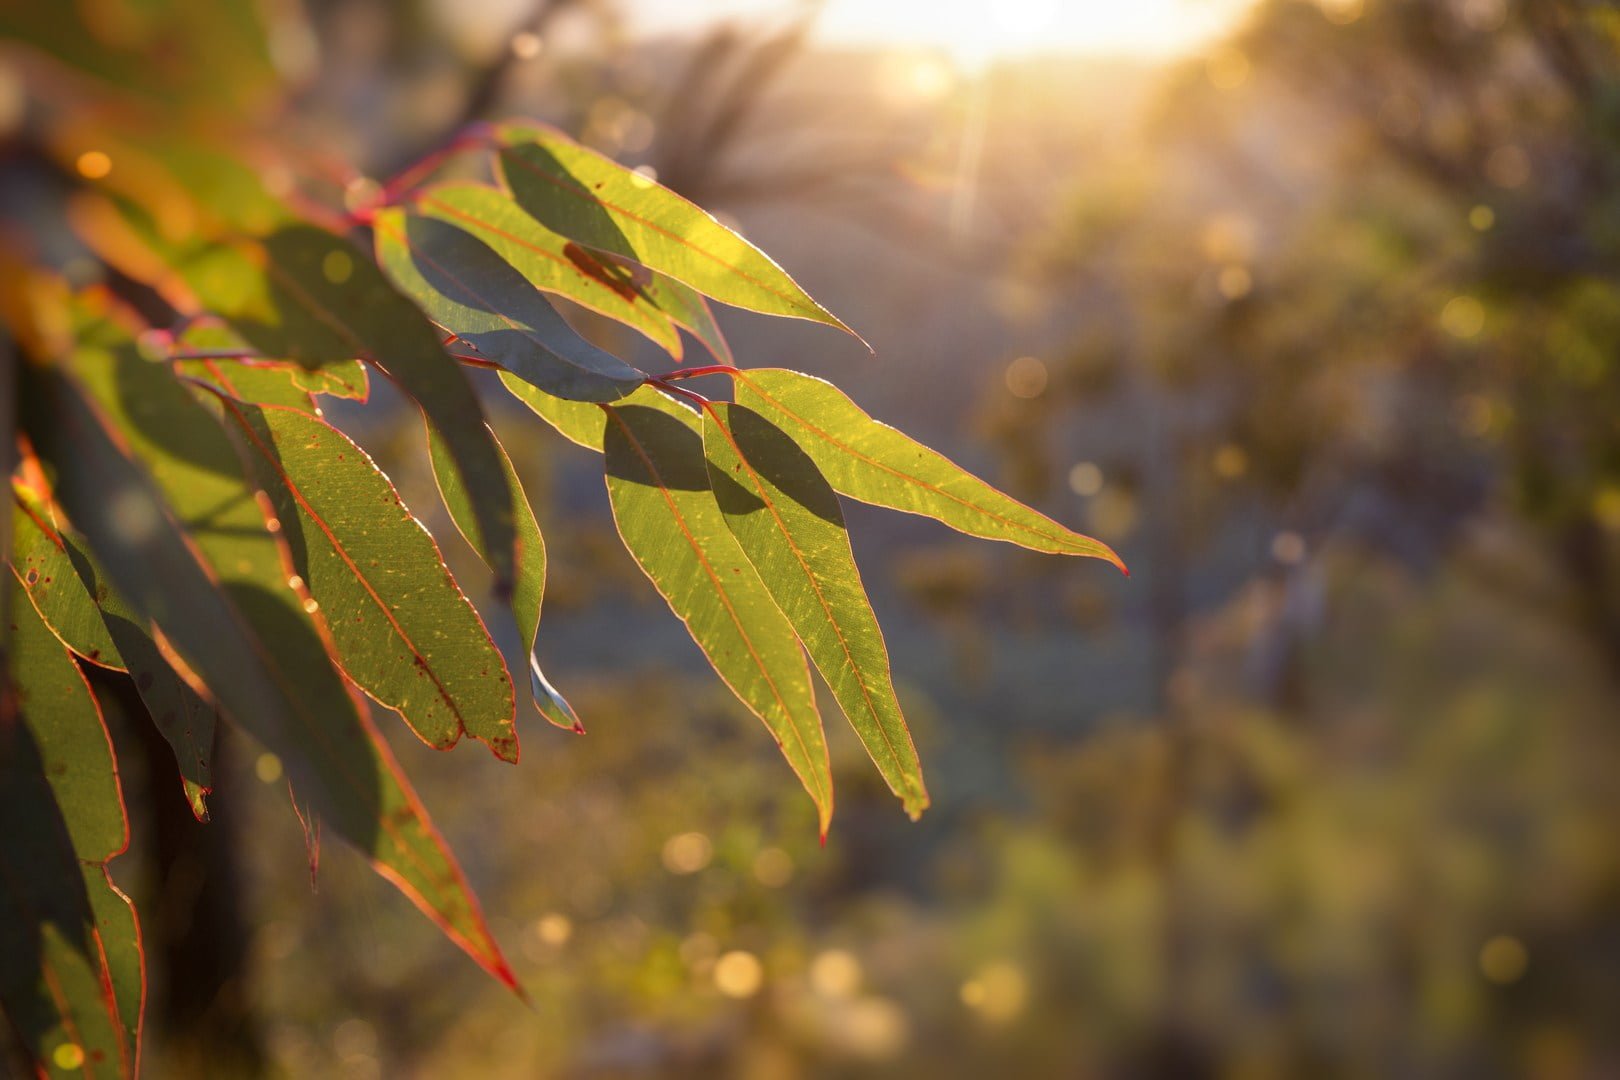 Golden morning sunlight shines through the crisp morning air and illuminates the green and red leaves of a eucalyptus tree